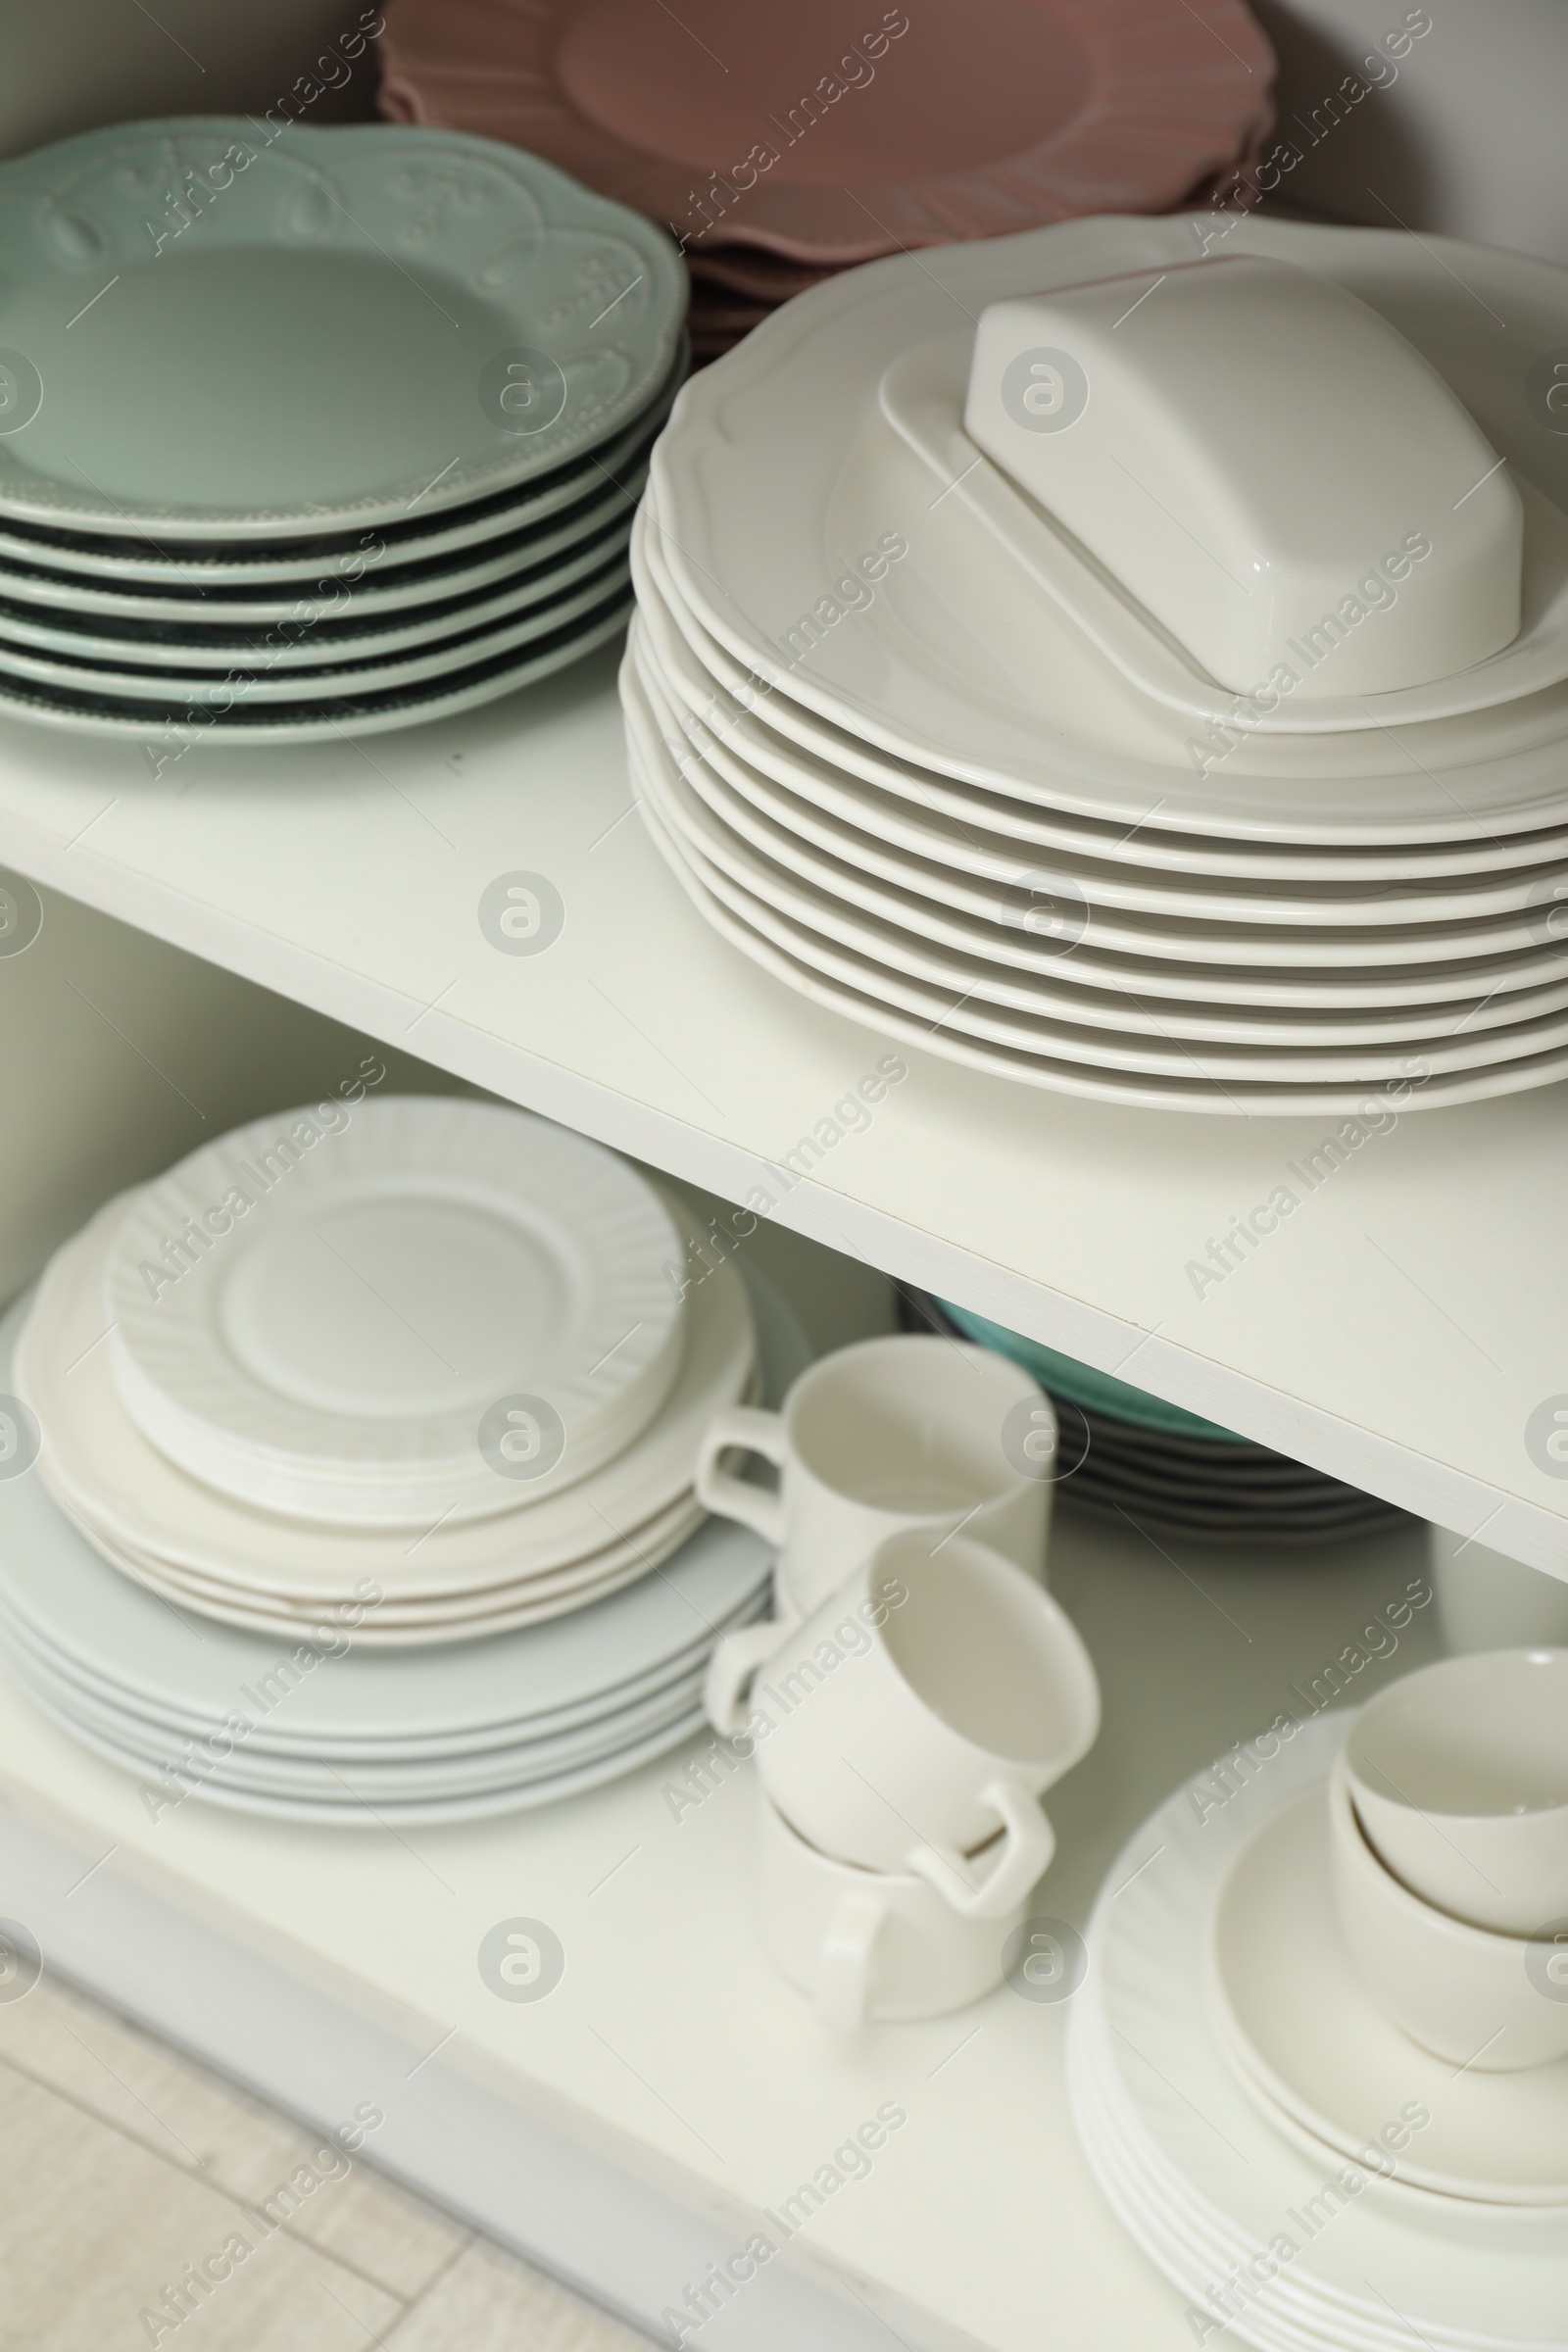 Photo of Clean plates, butter dish and cups on shelves in cabinet indoors